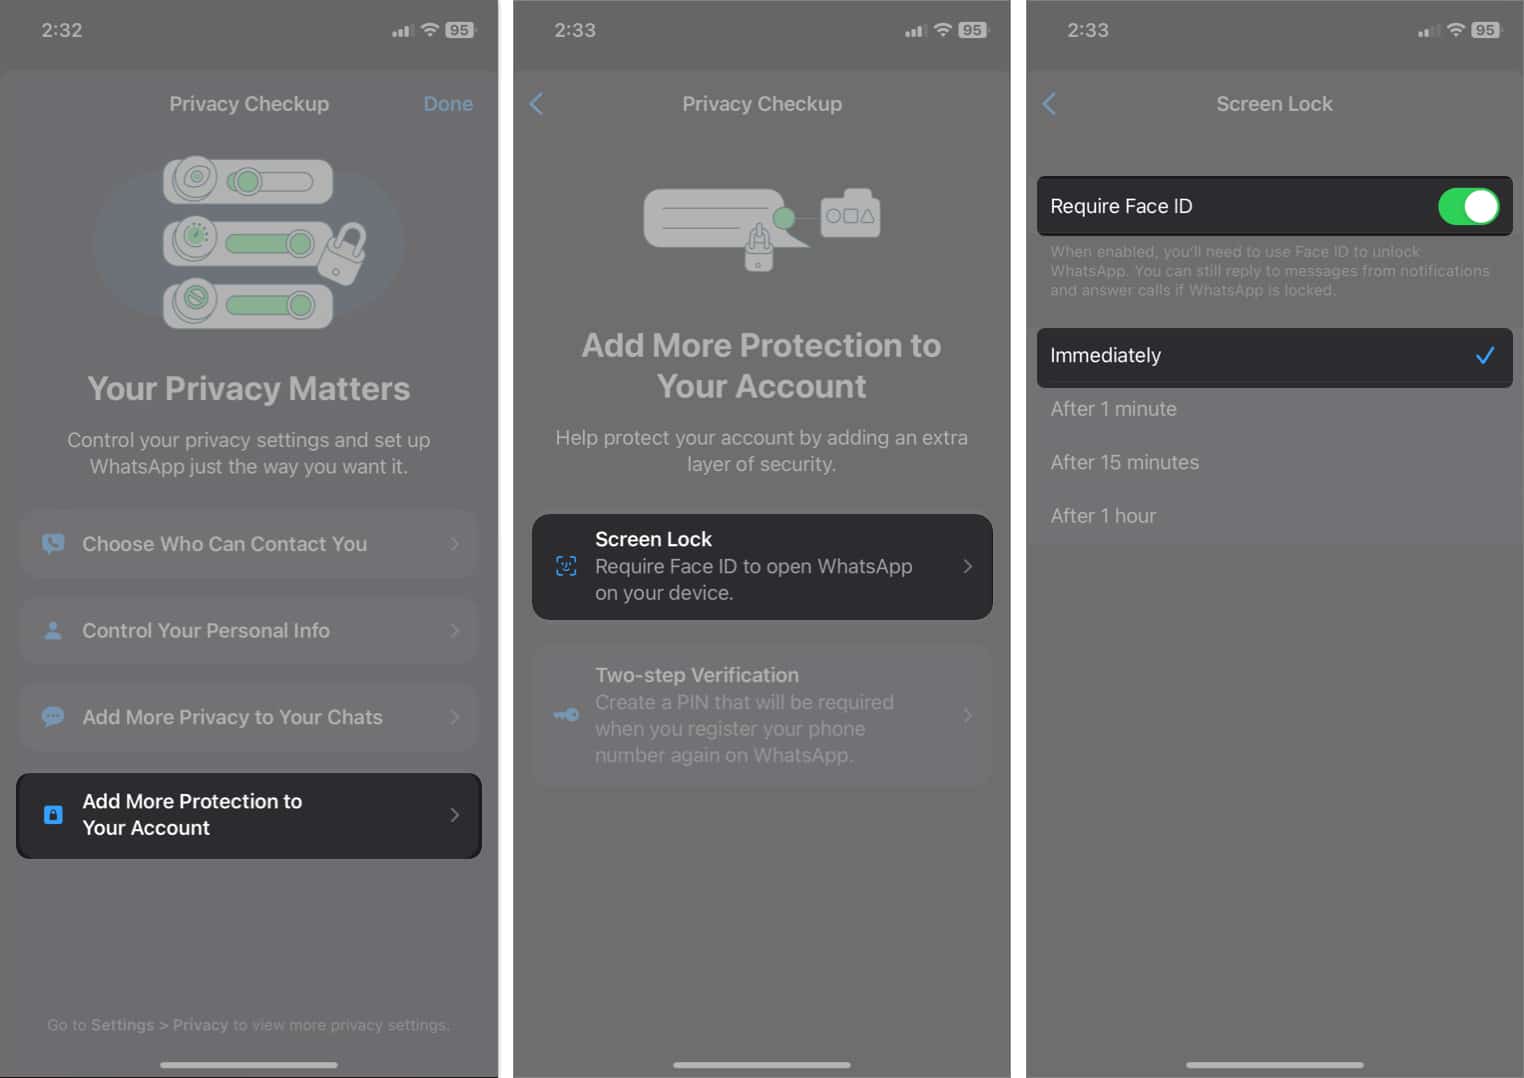 tap add more protection to your account, tap screen lock, toggle on require face id in whatsapp